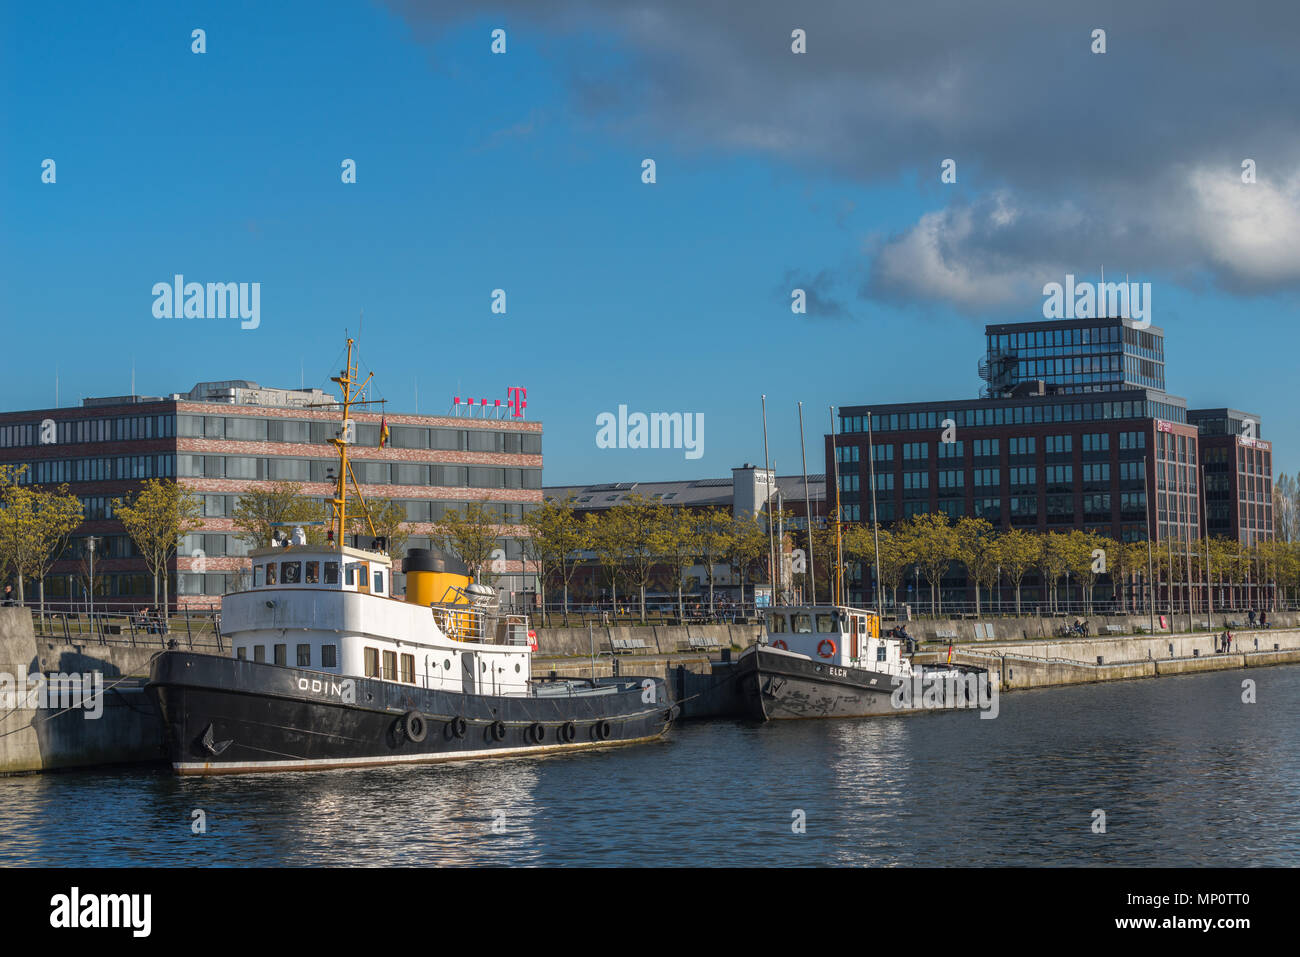 Office buildings and vitage shipstwo tugboats,  at the Hörn, end of Kiel Fjord, Kiel, Schleswig-Holstein, Germany Stock Photo